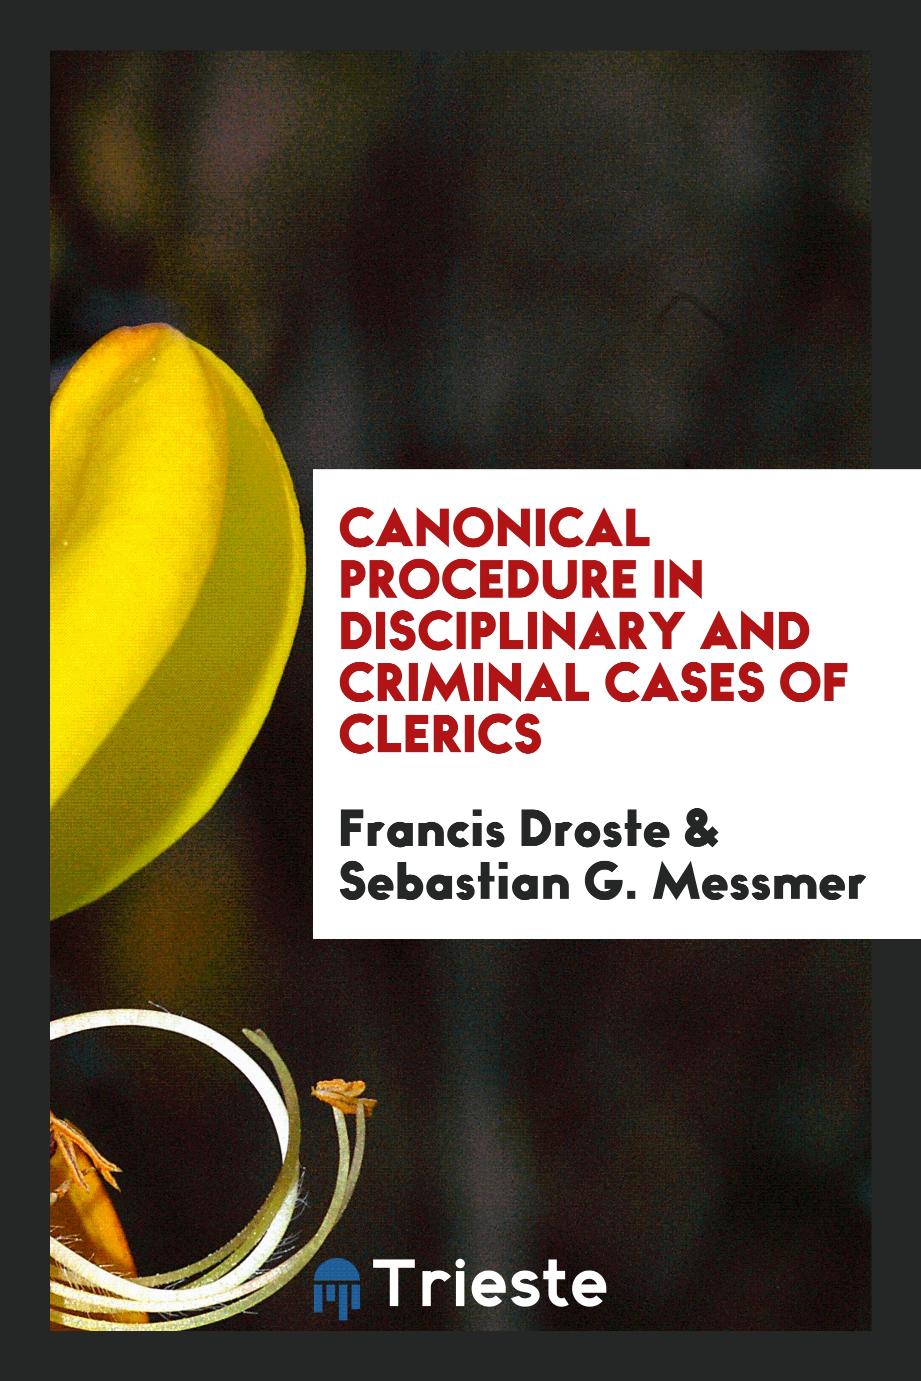 Canonical procedure in disciplinary and criminal cases of clerics